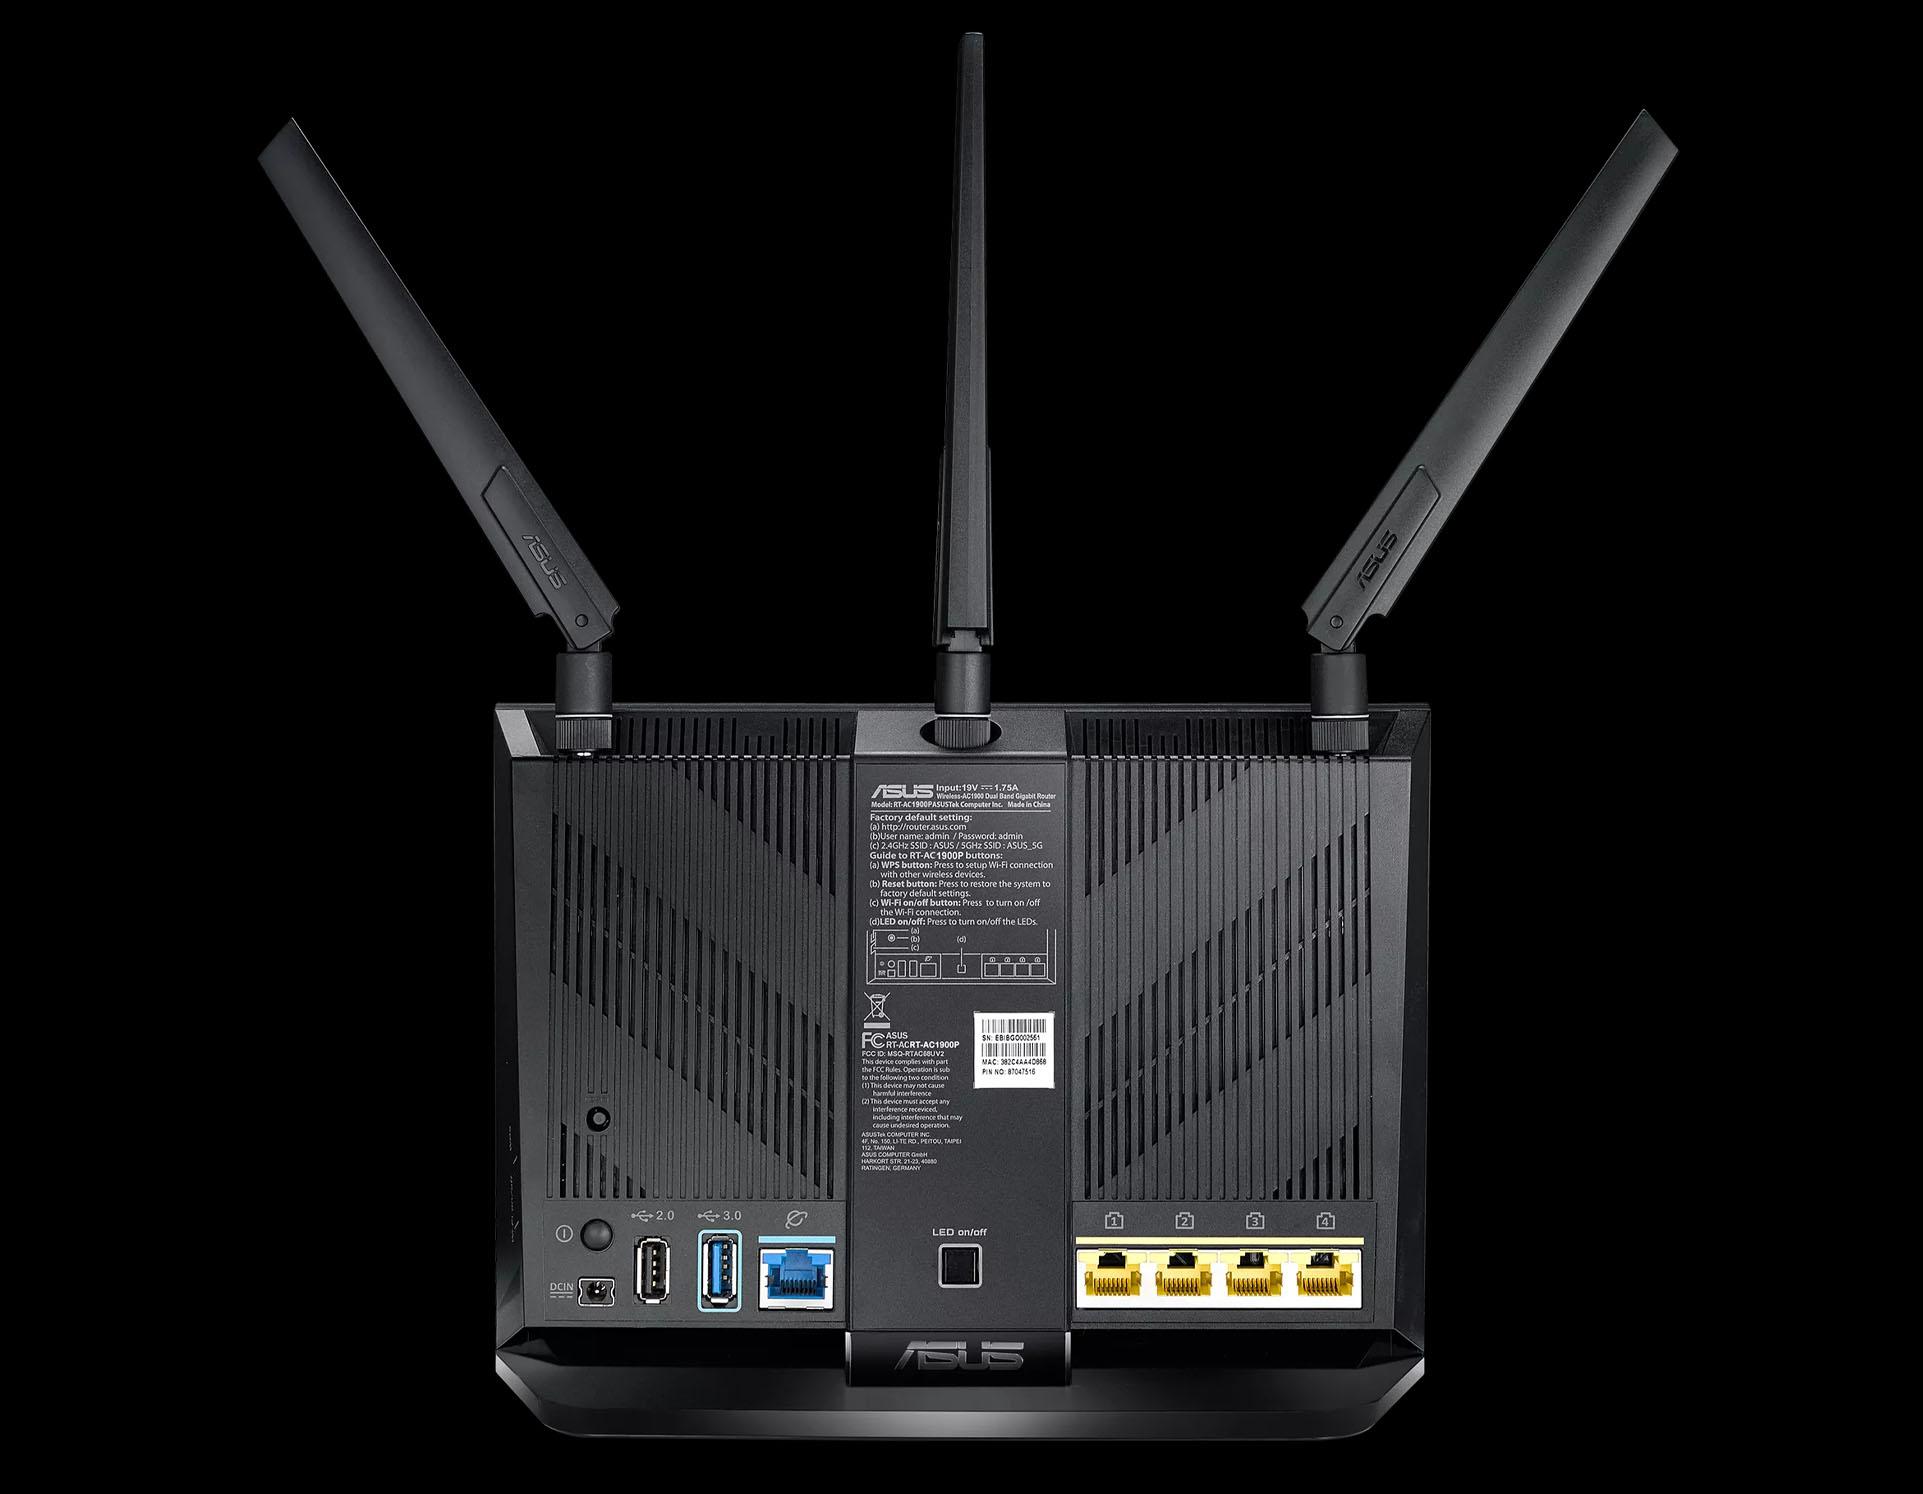 Get full Internet bandwidth with a fast router a25165a0 asus router rear